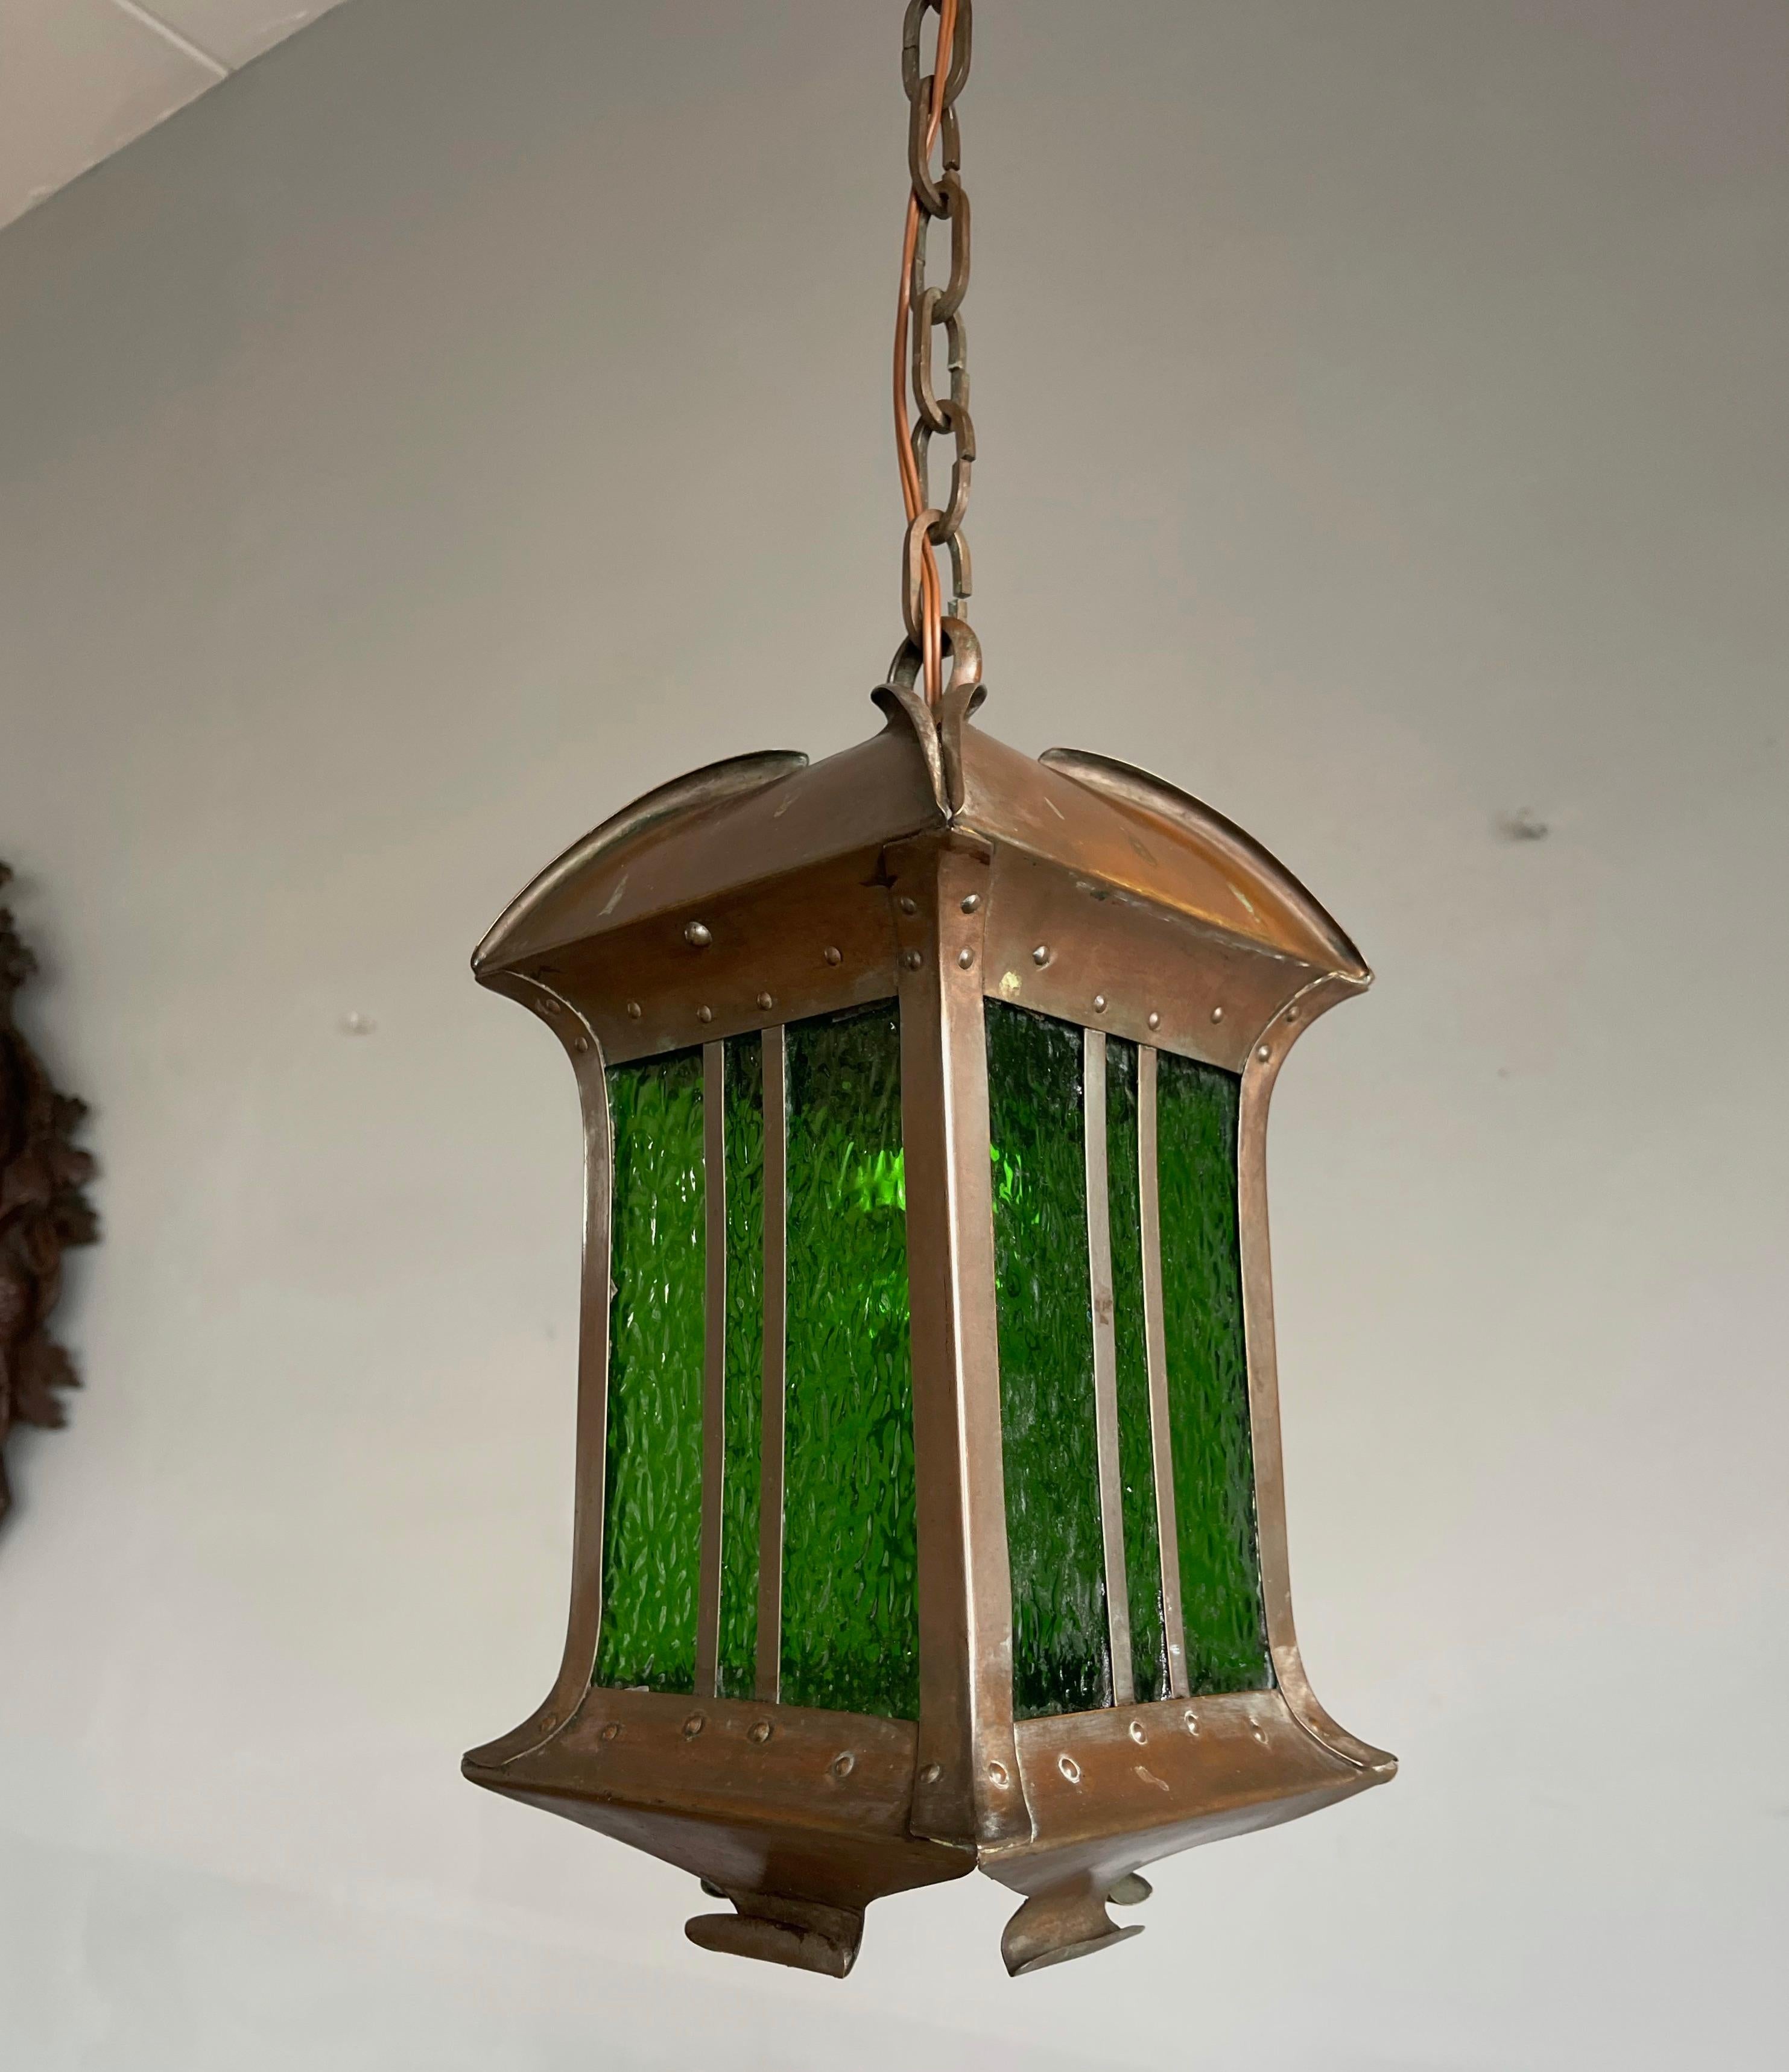 Rare and all handcrafted light fixture of perfect design and proportions.

If you are looking for an early 1900s, stylish and top quality crafted light to grace your entry hall, landing or bedroom then look no further, because if ever there was a